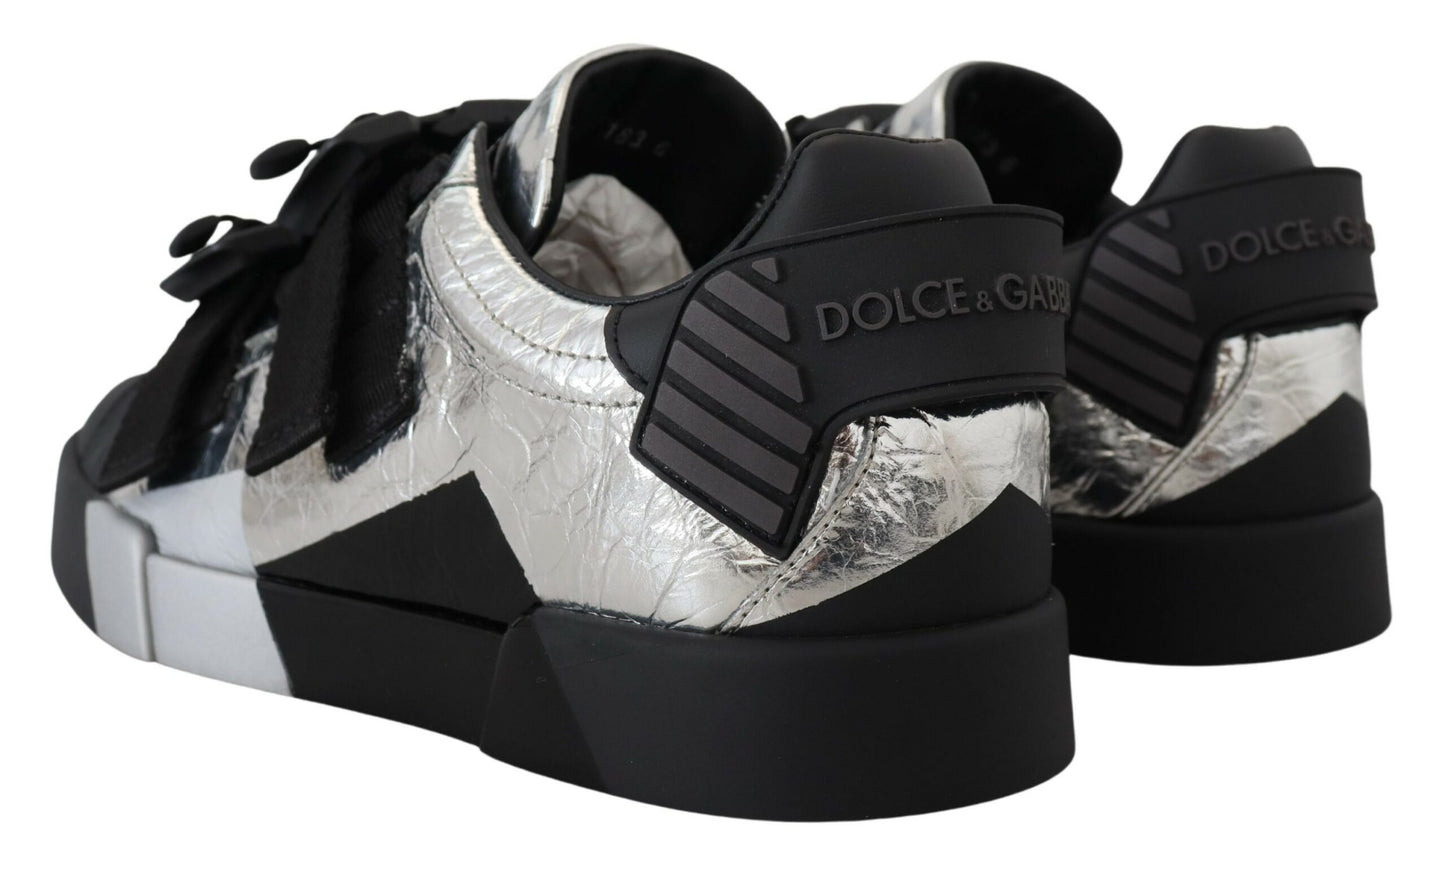 Exclusive Silver and Black Low Top Leather Sneakers